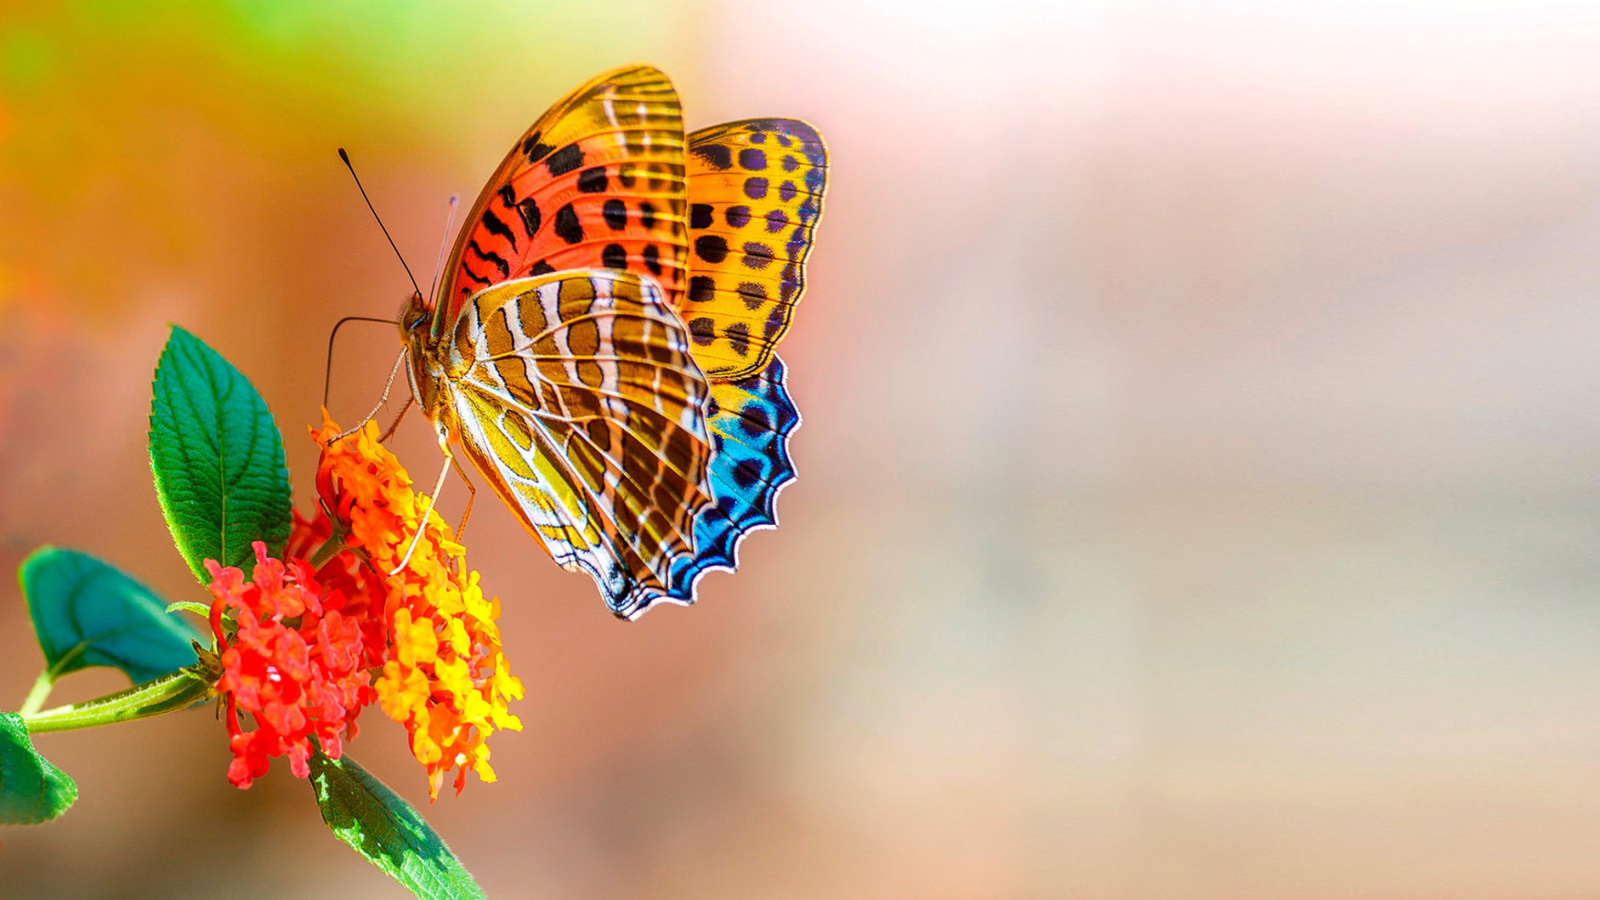 Colorful Animated Butterfly screenshot #1 1600x900